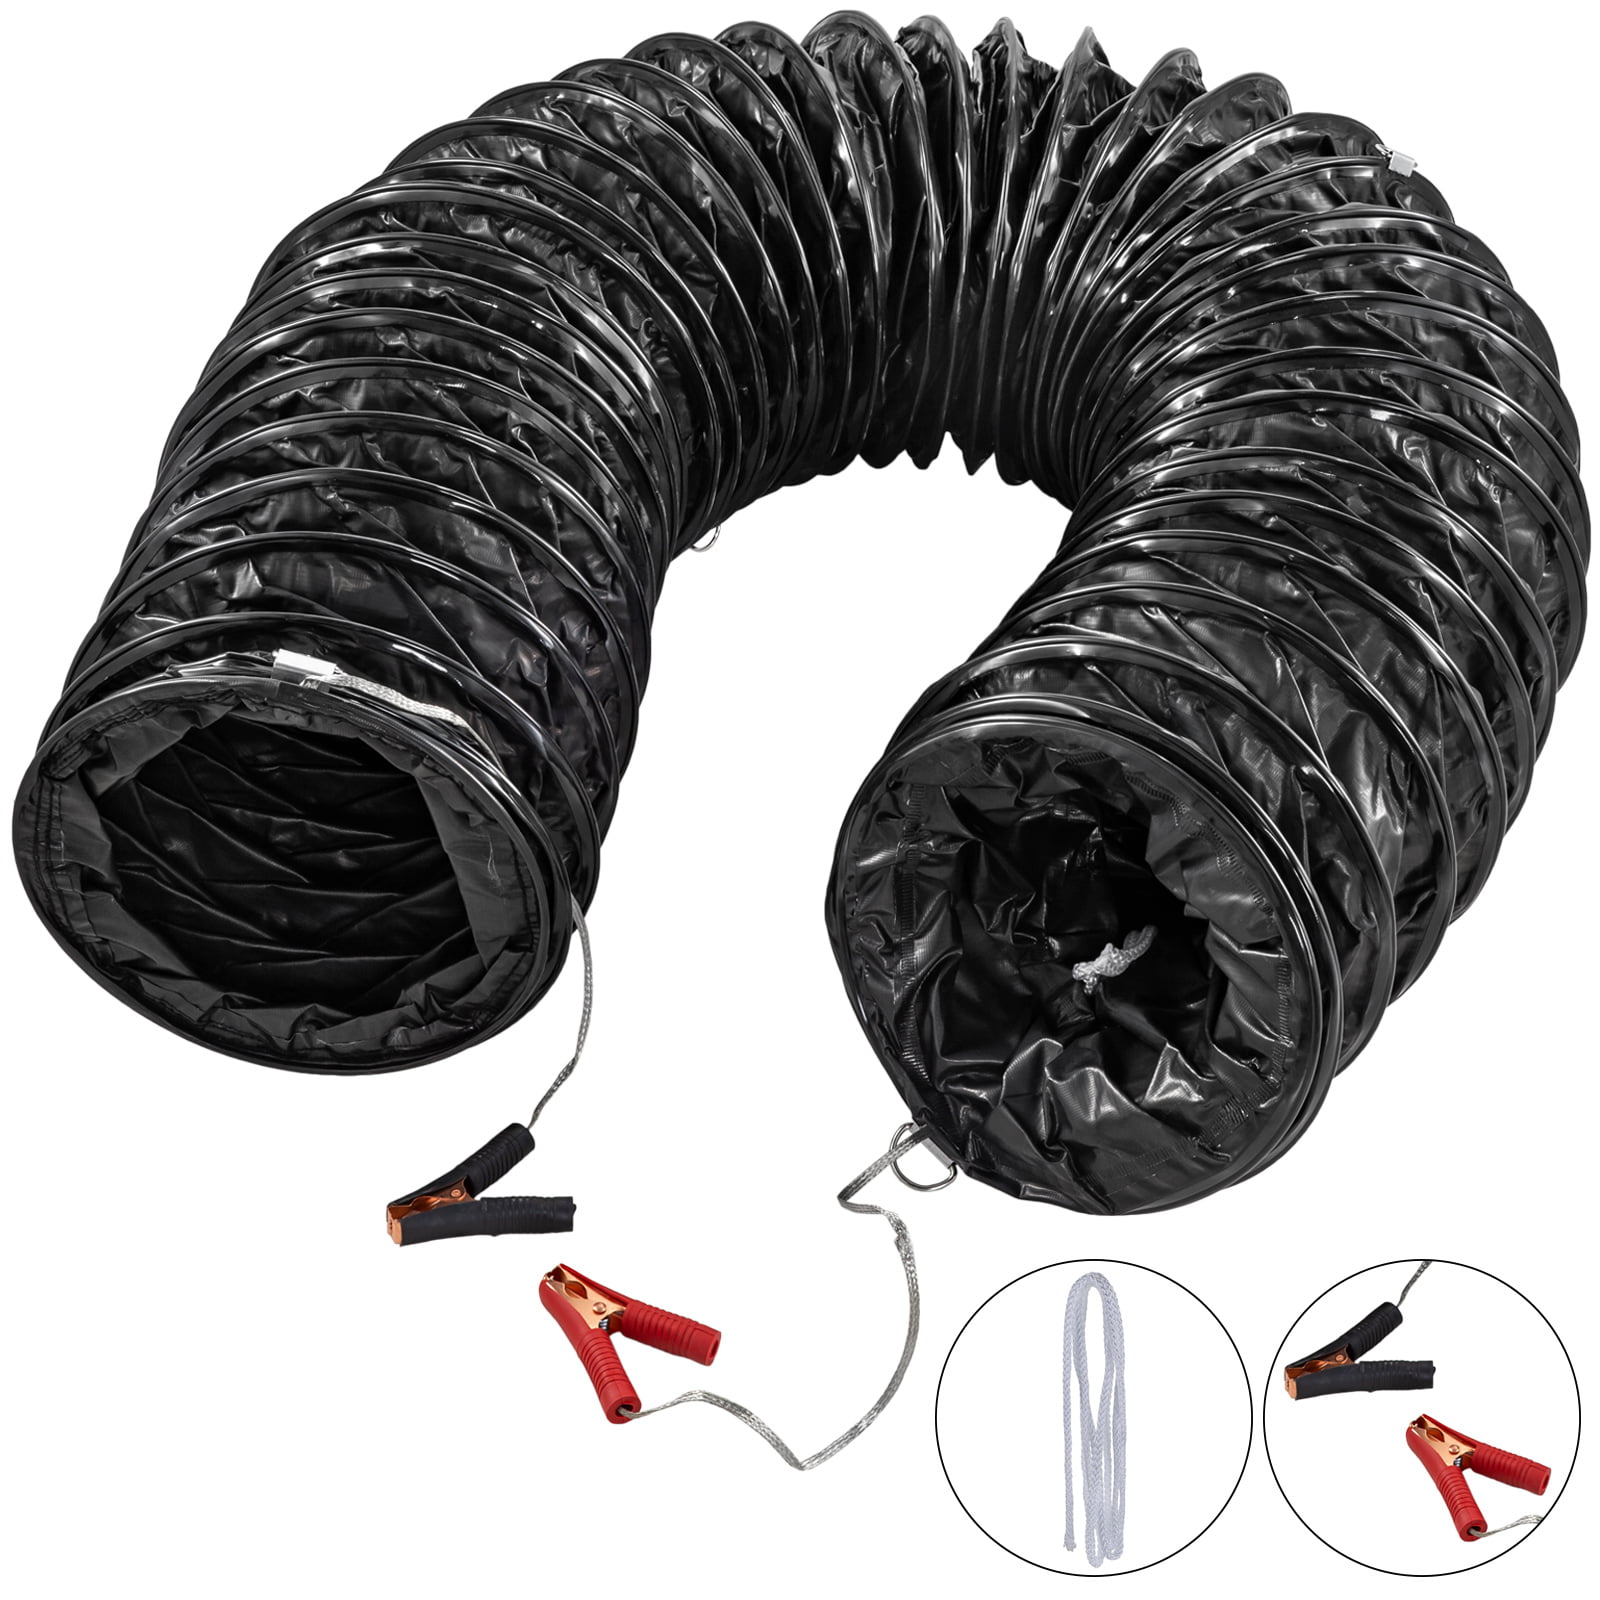 10''25FT Flexible Ducing Hose PVC Extractor Fan Blower Explosion-Proof Duct Hose